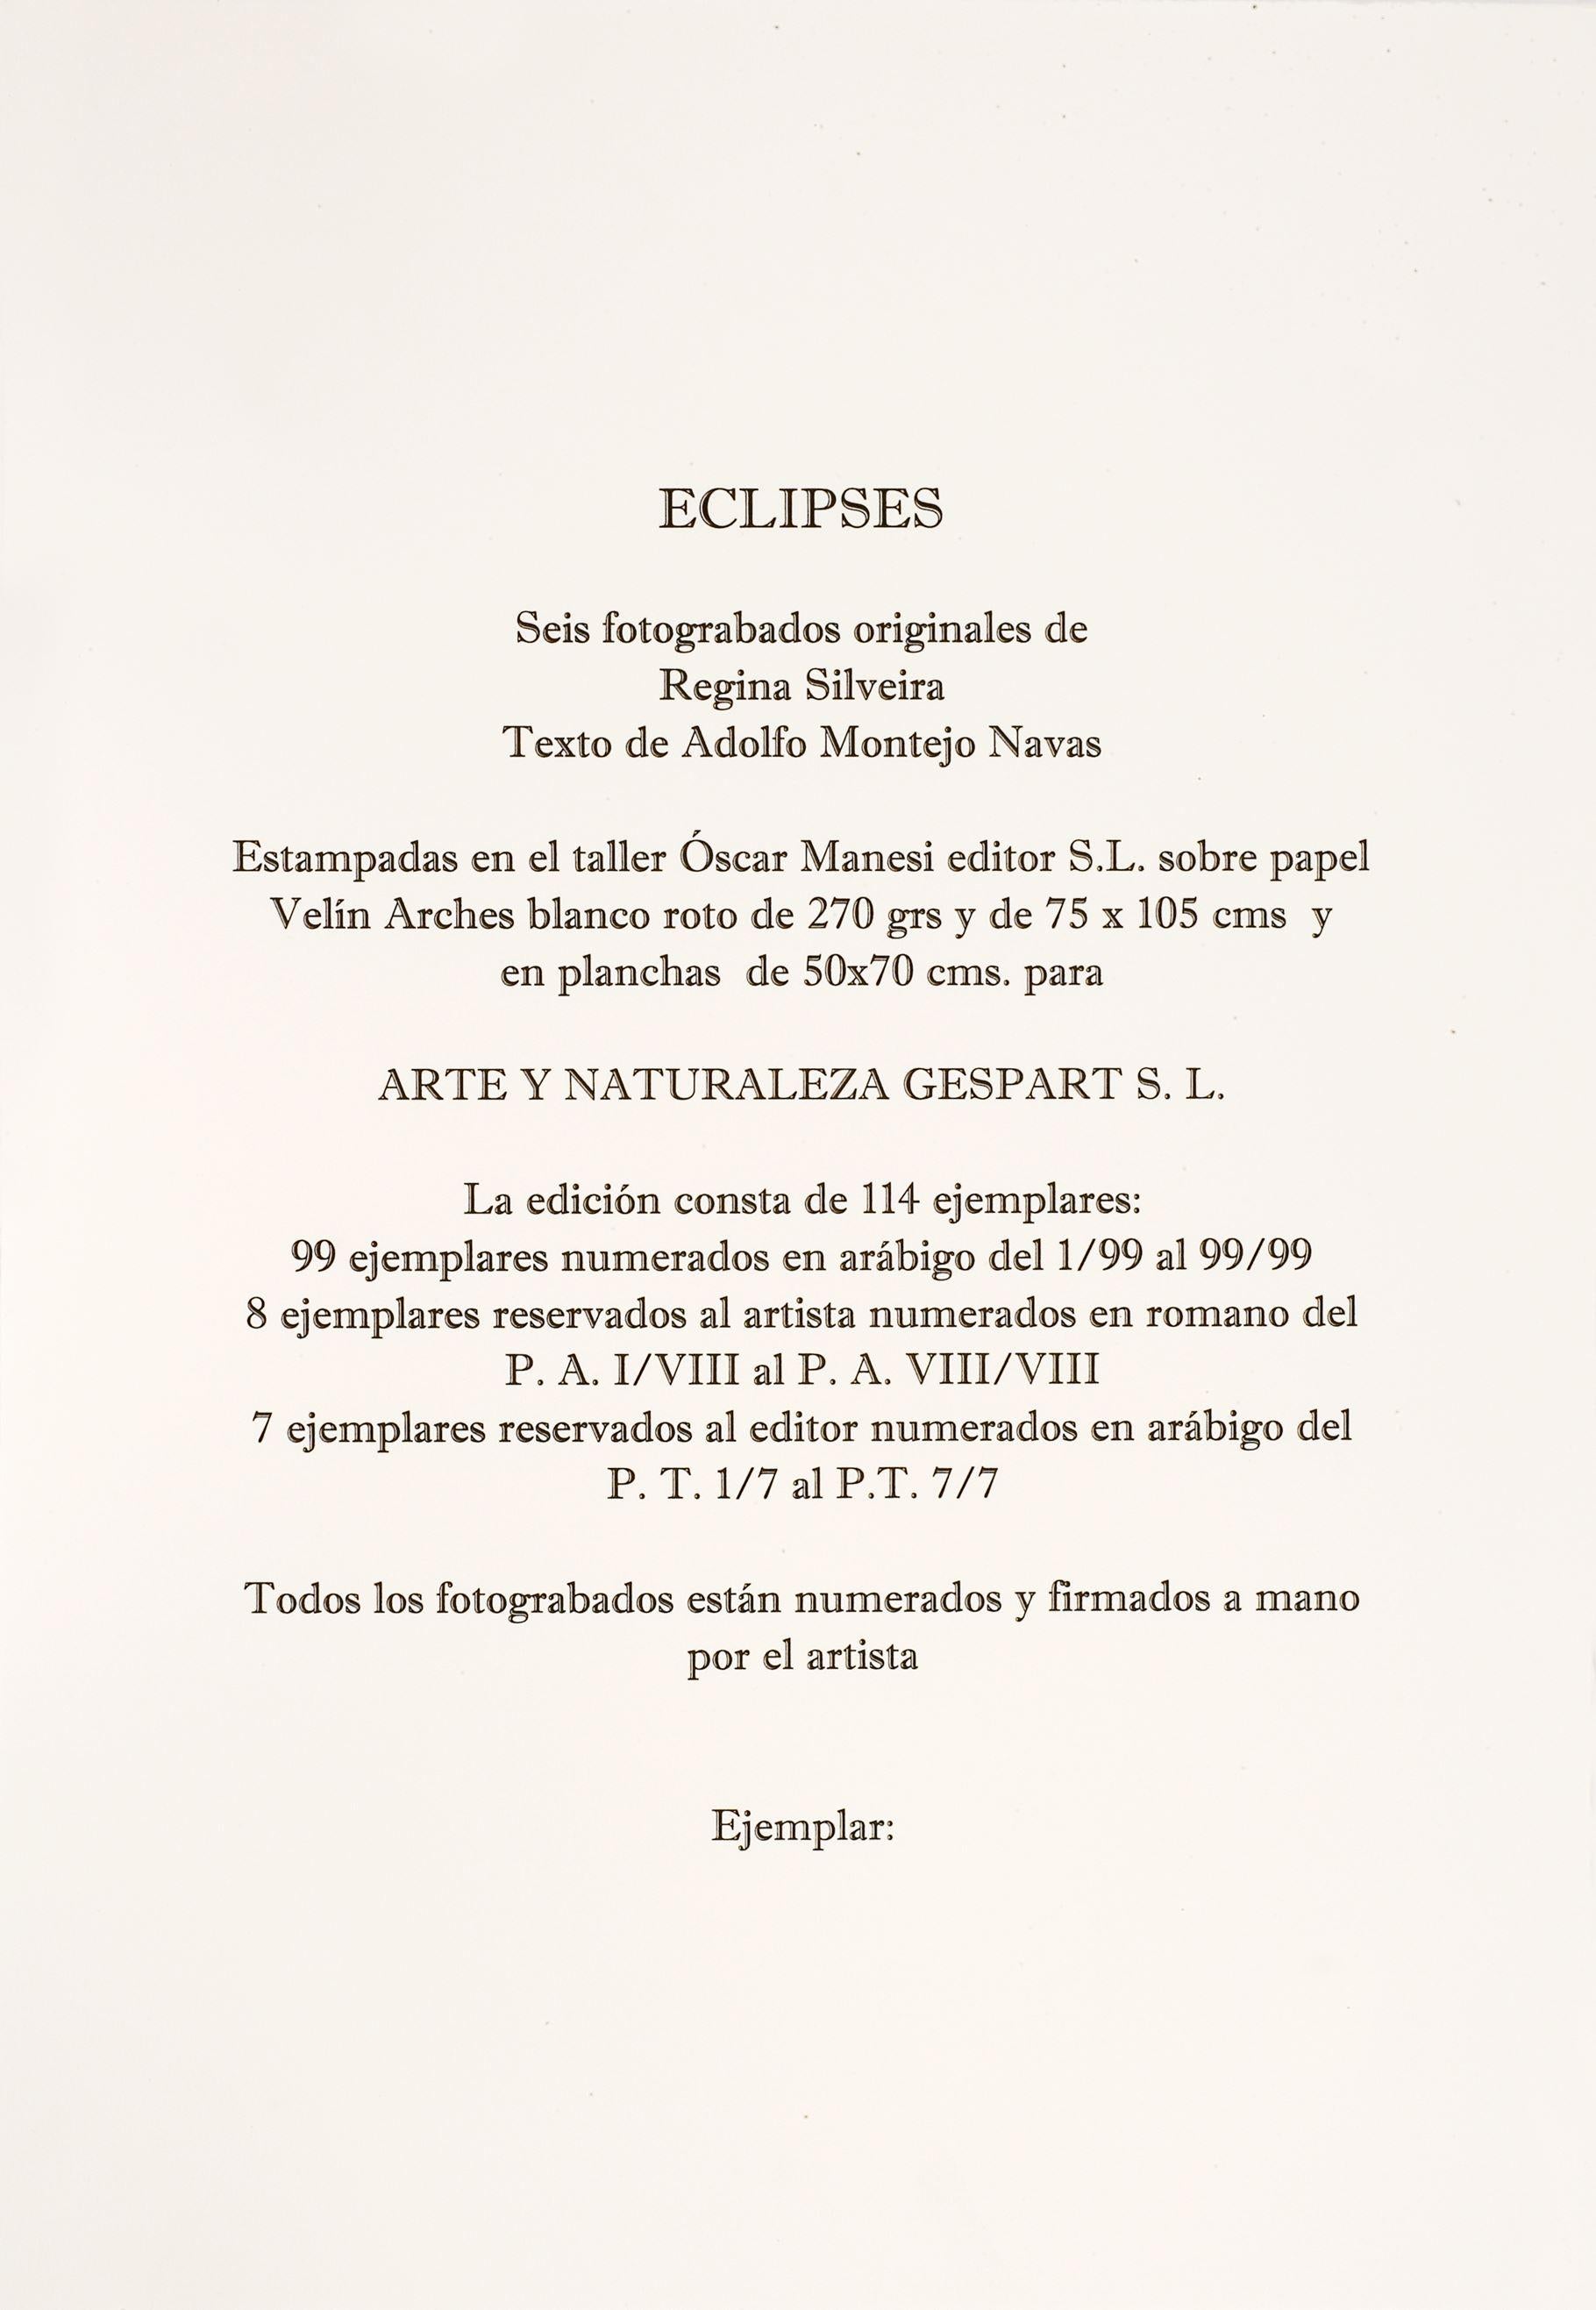 Author: Regina Silveira (Brazil, 1939)
Title: 'Eclipses (carpeta) of 6 pieces', 2005
Medium: Print.
Technique: Photoengraving on paper Velin Arches 270 gr.
Size: 27.6 x 19.7 in. (70 x 50 cm.)
Signature: Yes
Edition of 99
SKU: SIL1692-002-106
Signed: